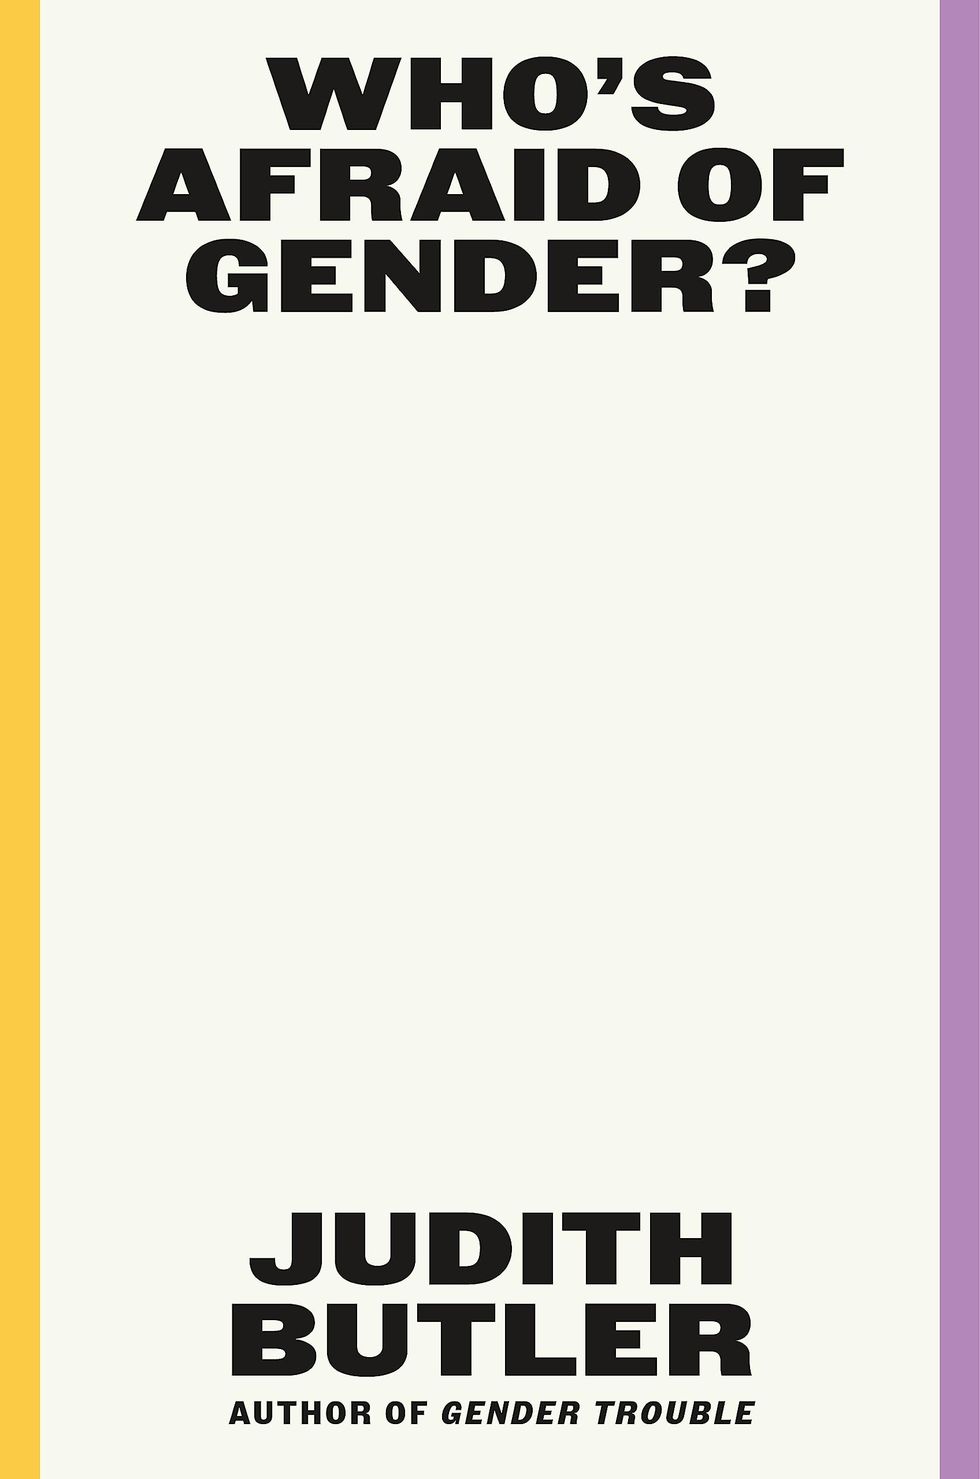 Who’s Afraid of Gender?, by Judith Butler